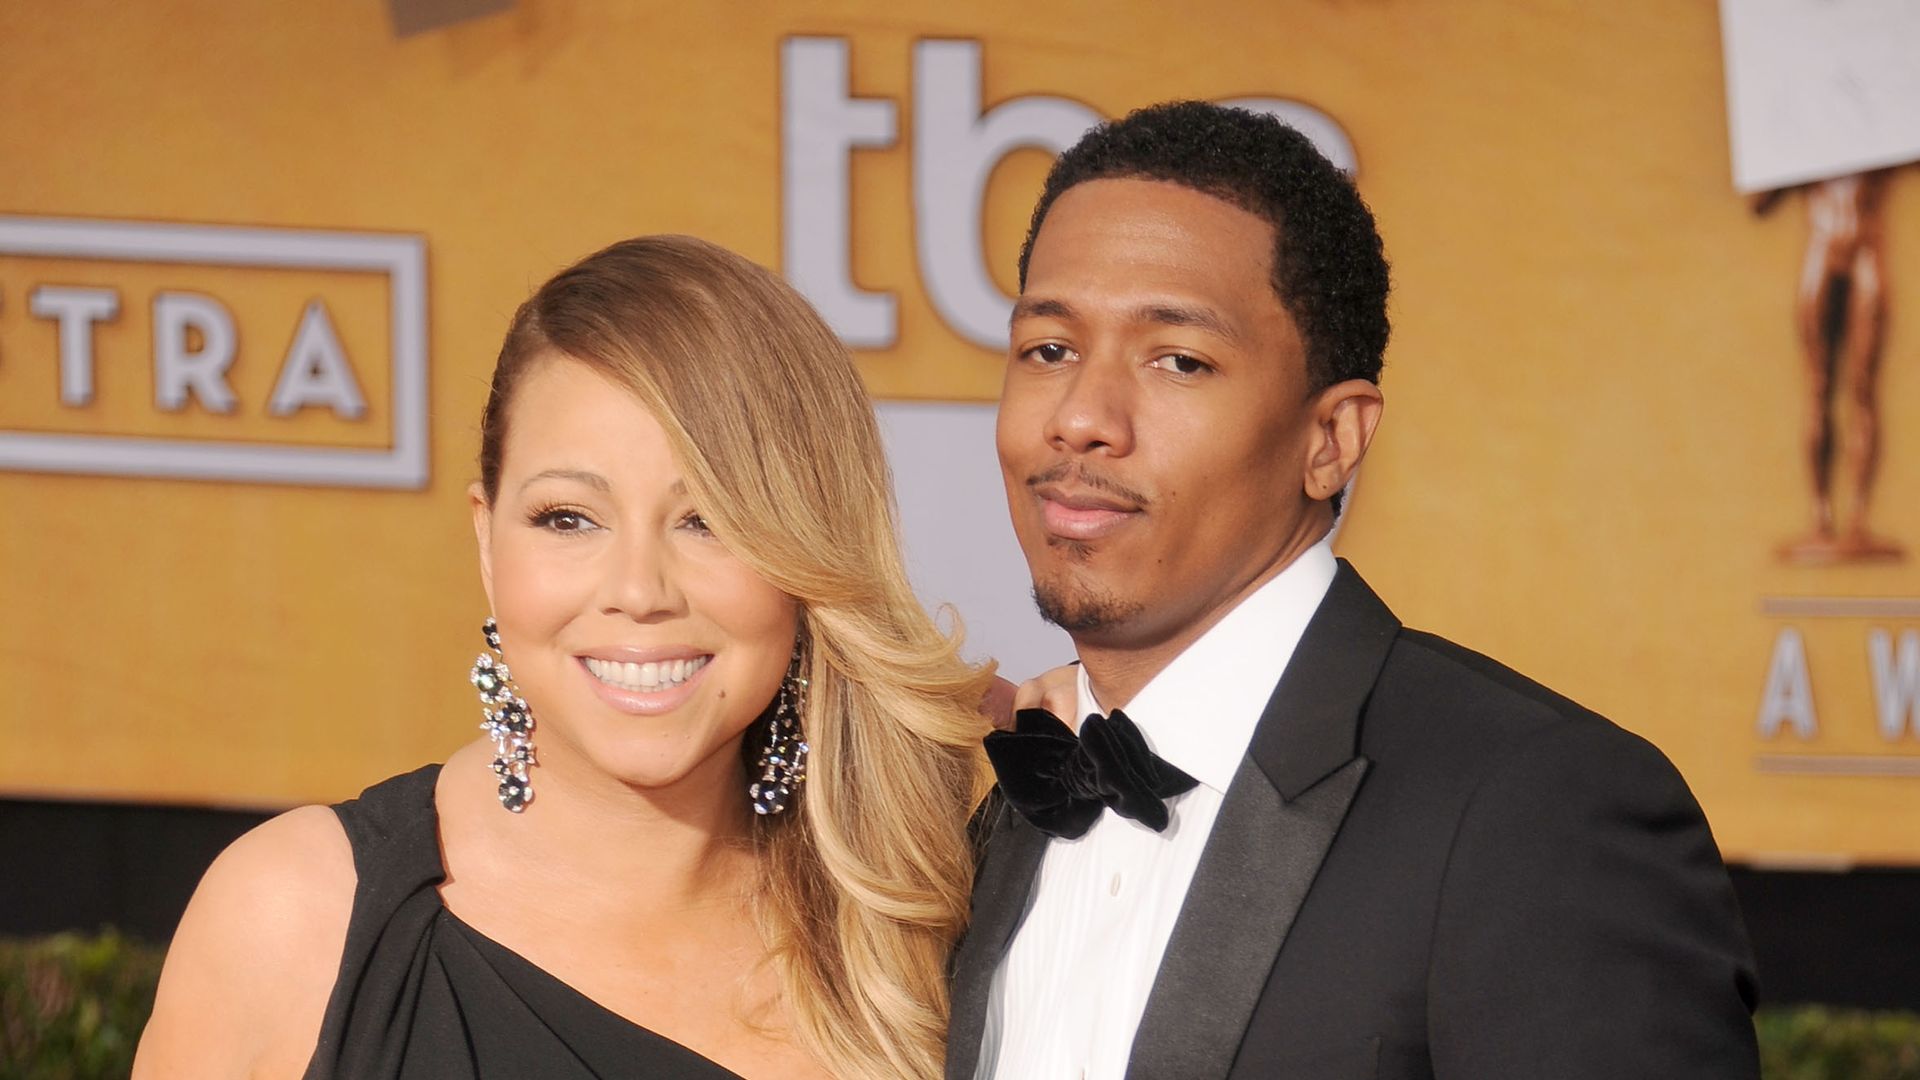 Mariah Carey and actor/TV personality Nick Cannon arrive at the 20th Annual Screen Actors Guild Awards at The Shrine Auditorium on January 18, 2014 in Los Angeles, California